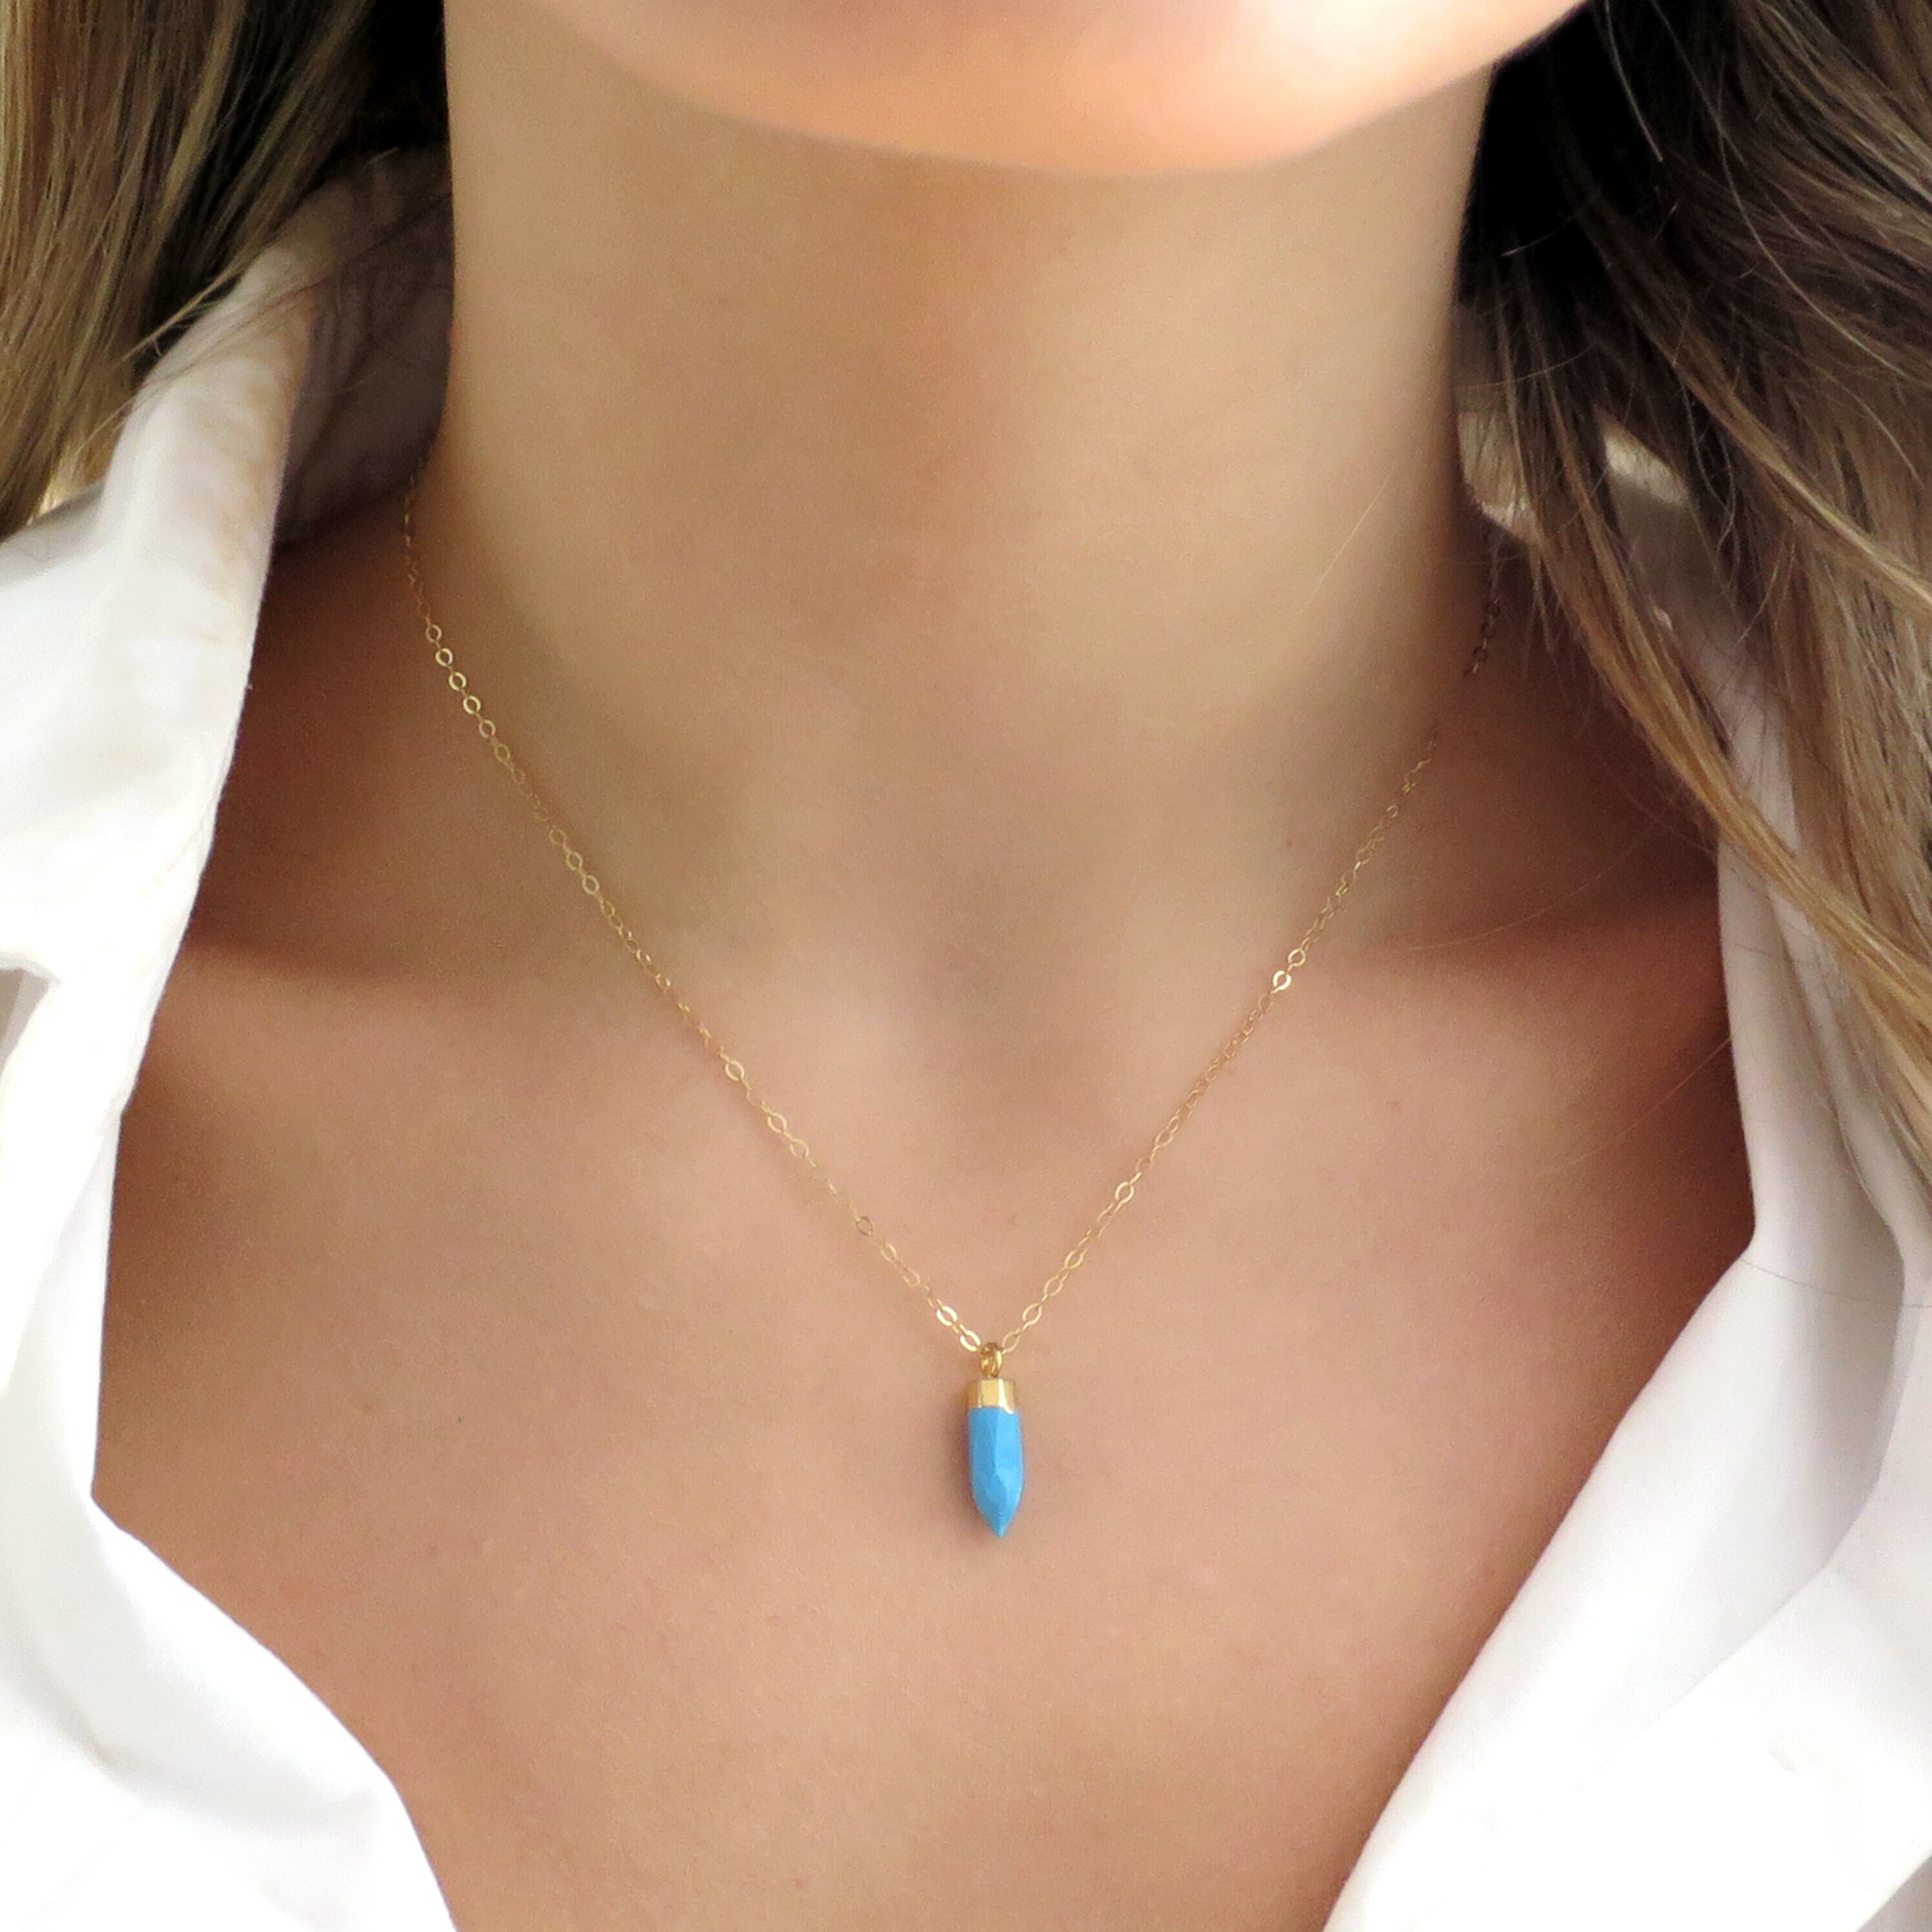 Buy Dainty Turquoise Necklace, Dainty Star Gold Jewelry, Star Pendant  Necklace, Wire Wrapped Necklace, Bridesmaid Gift, Bridal Necklace Online in  India - Etsy